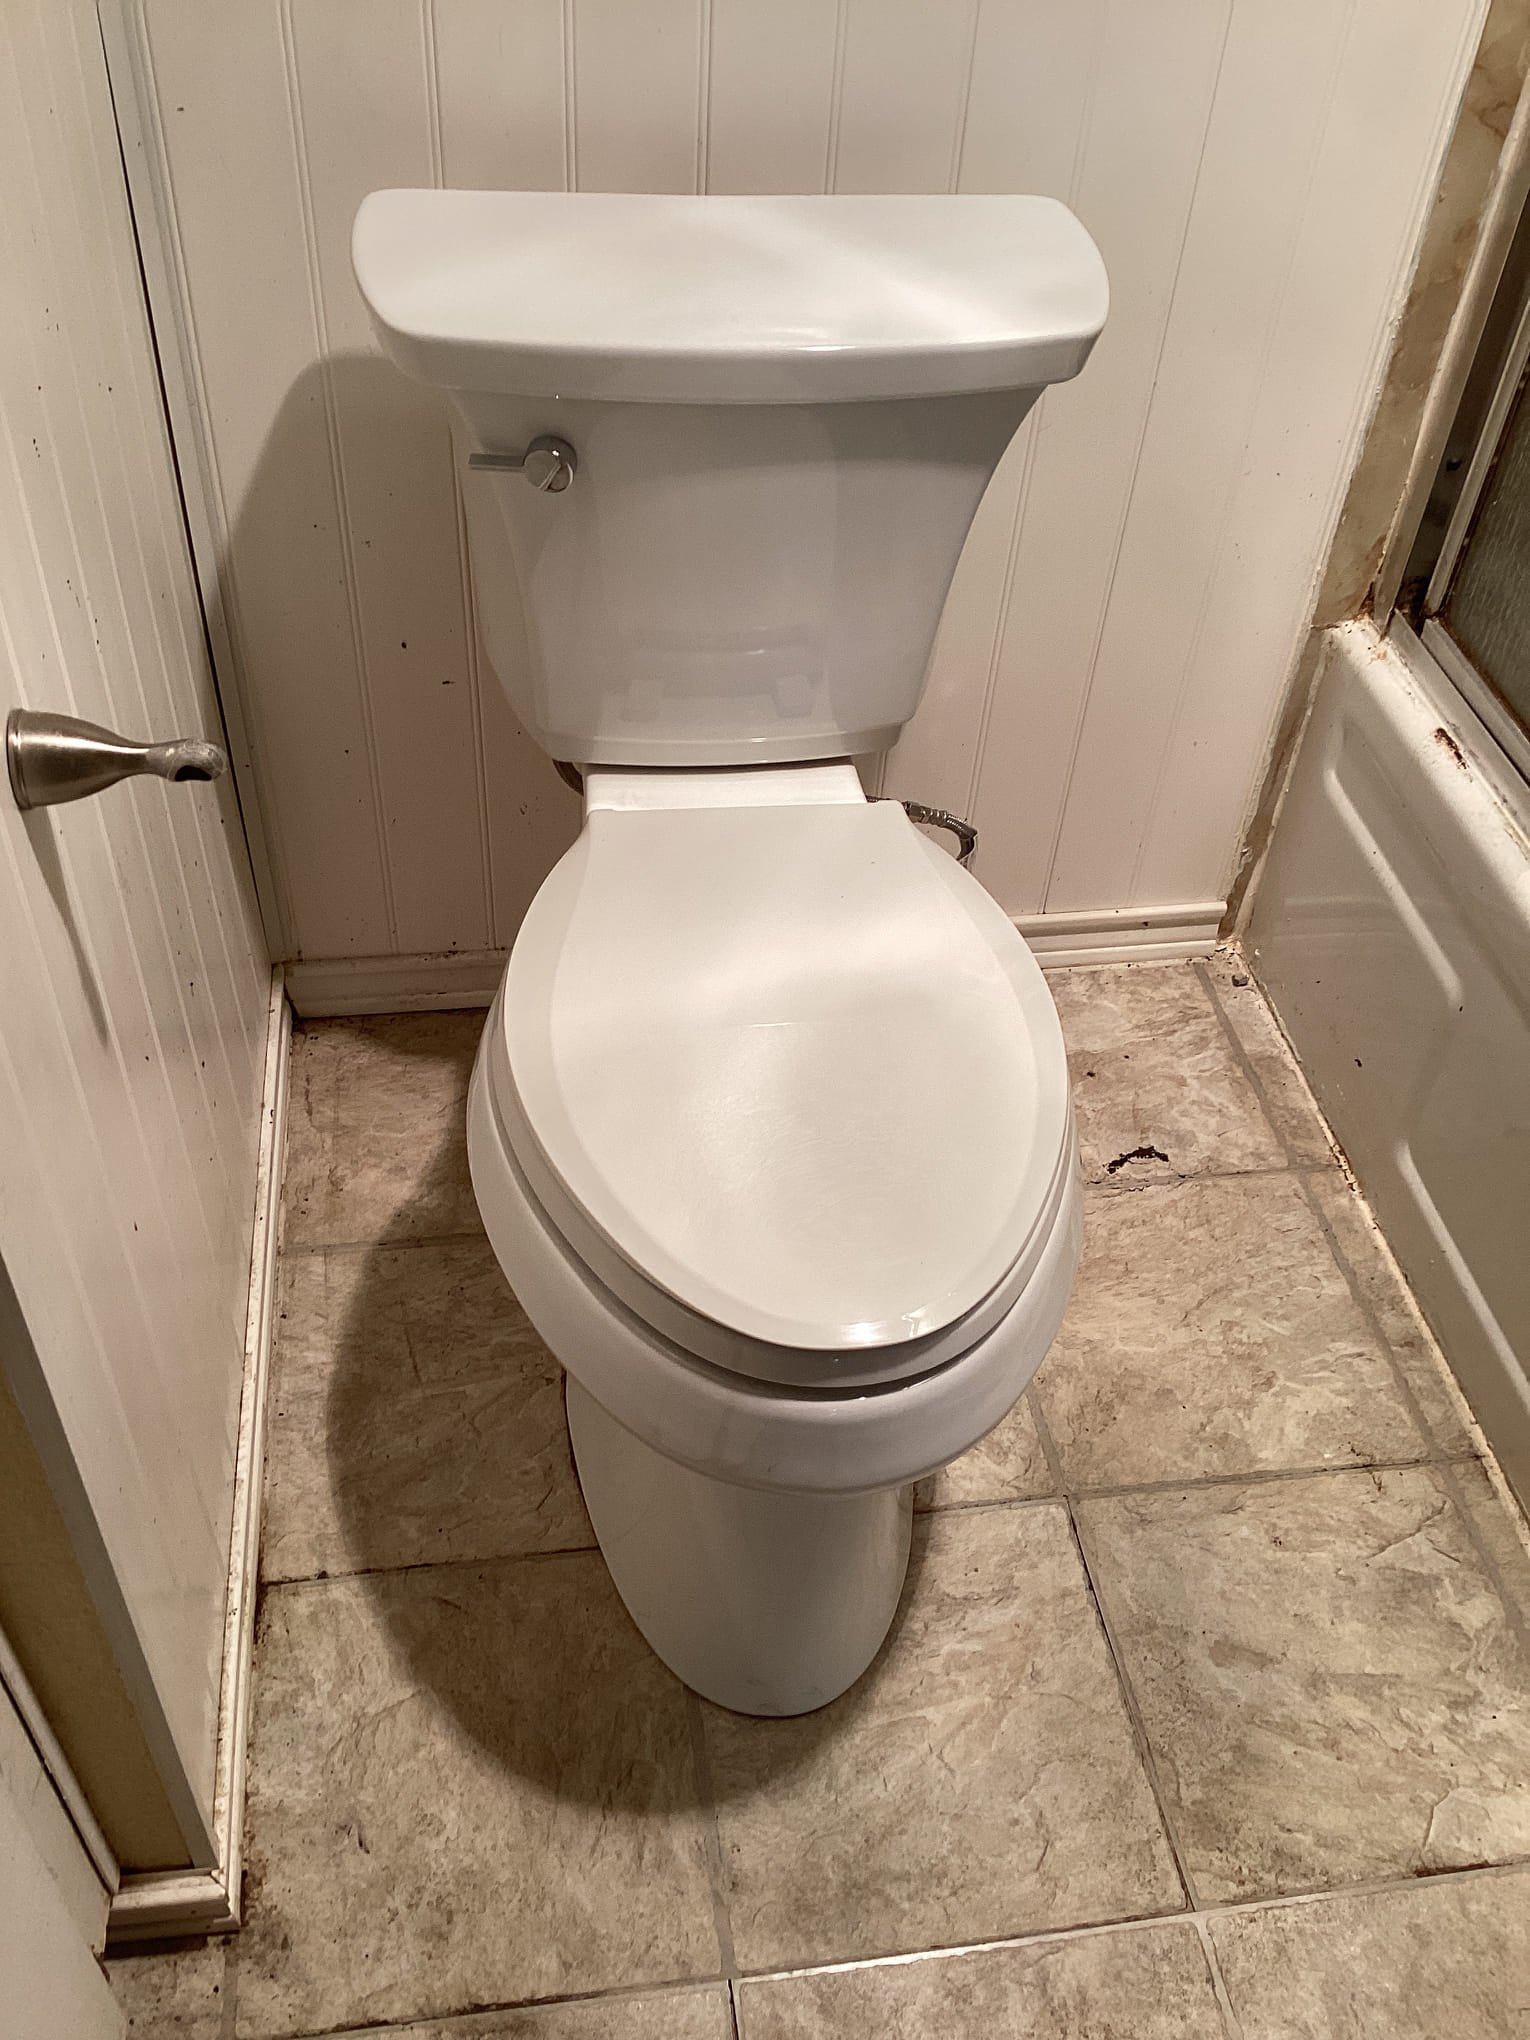 Toilet repairs and installation